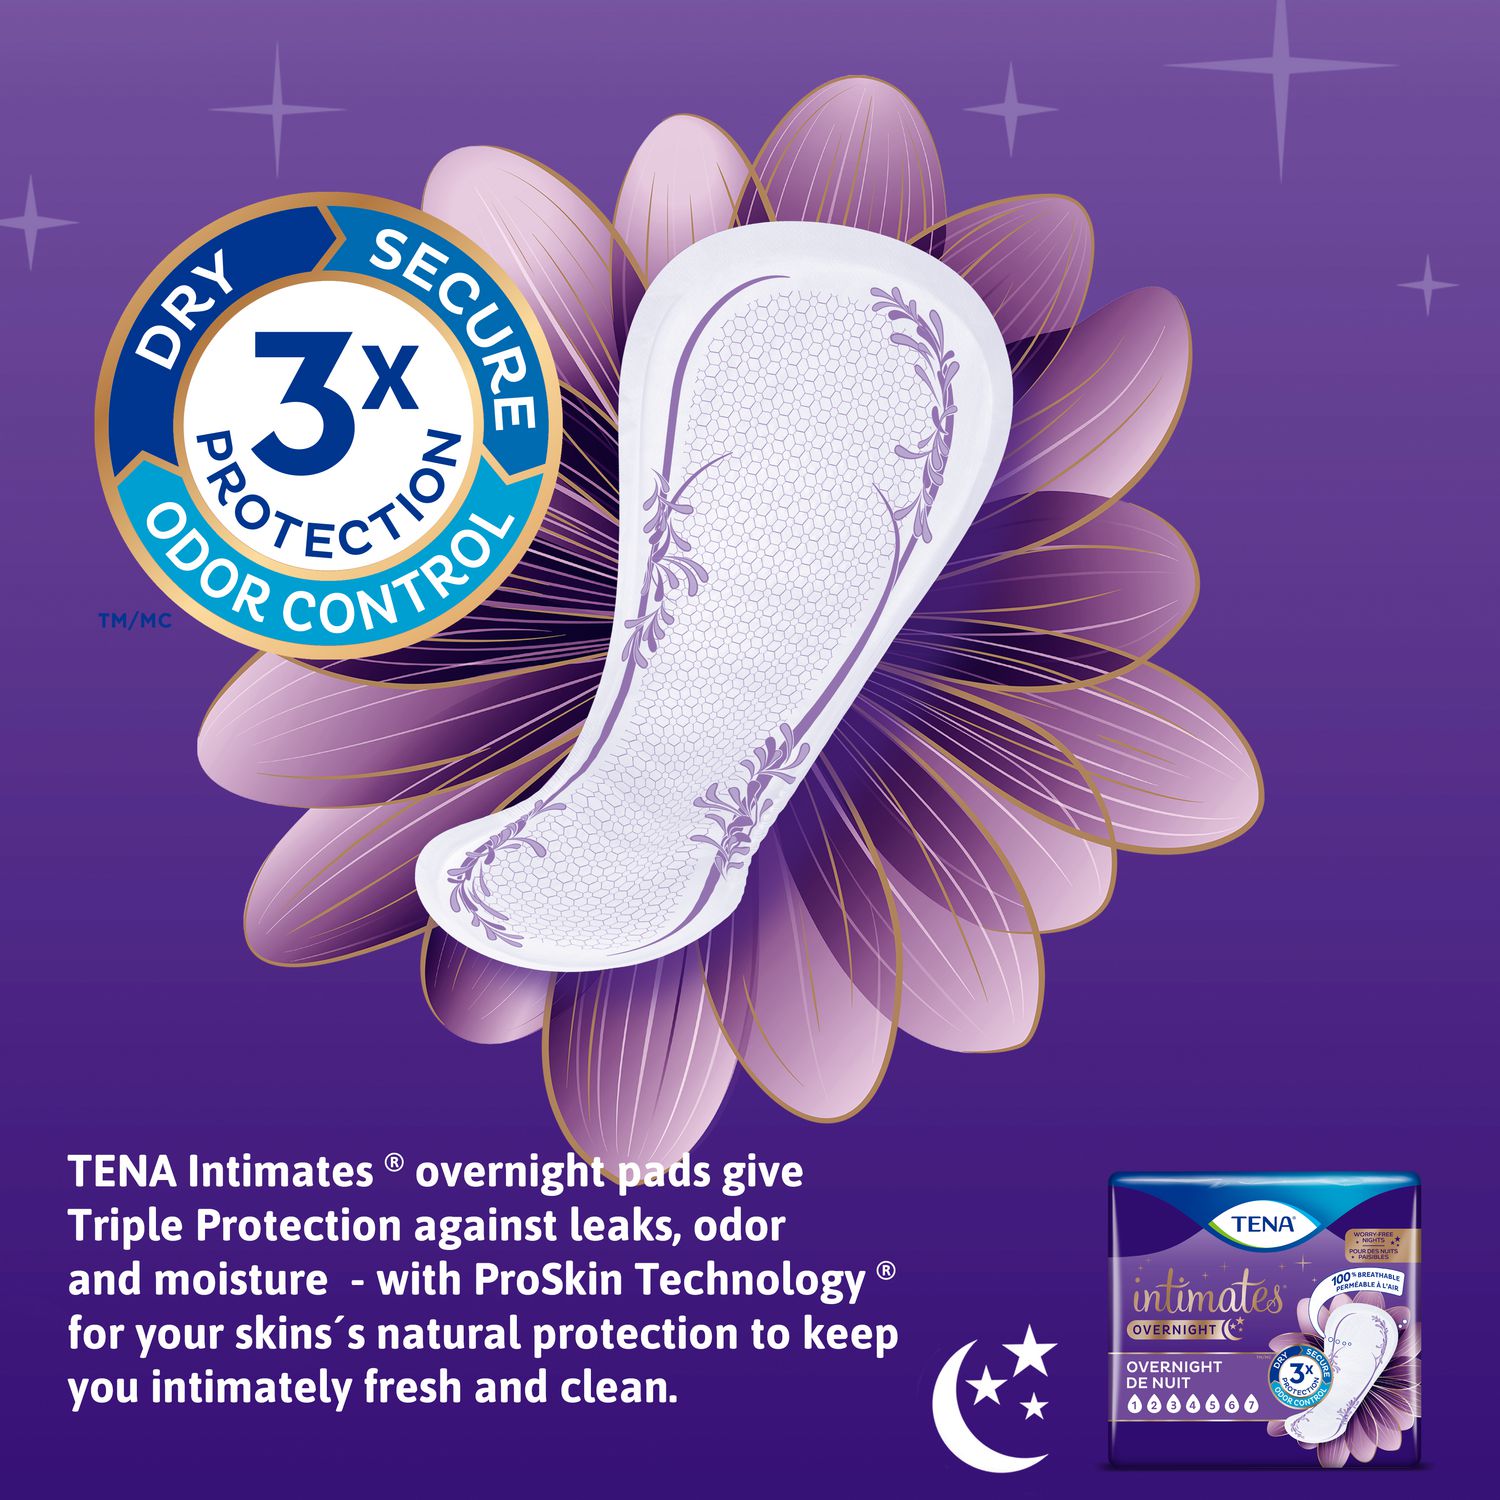 Tena Night Super 2 Piece Incontinence Pads, 24 Count 